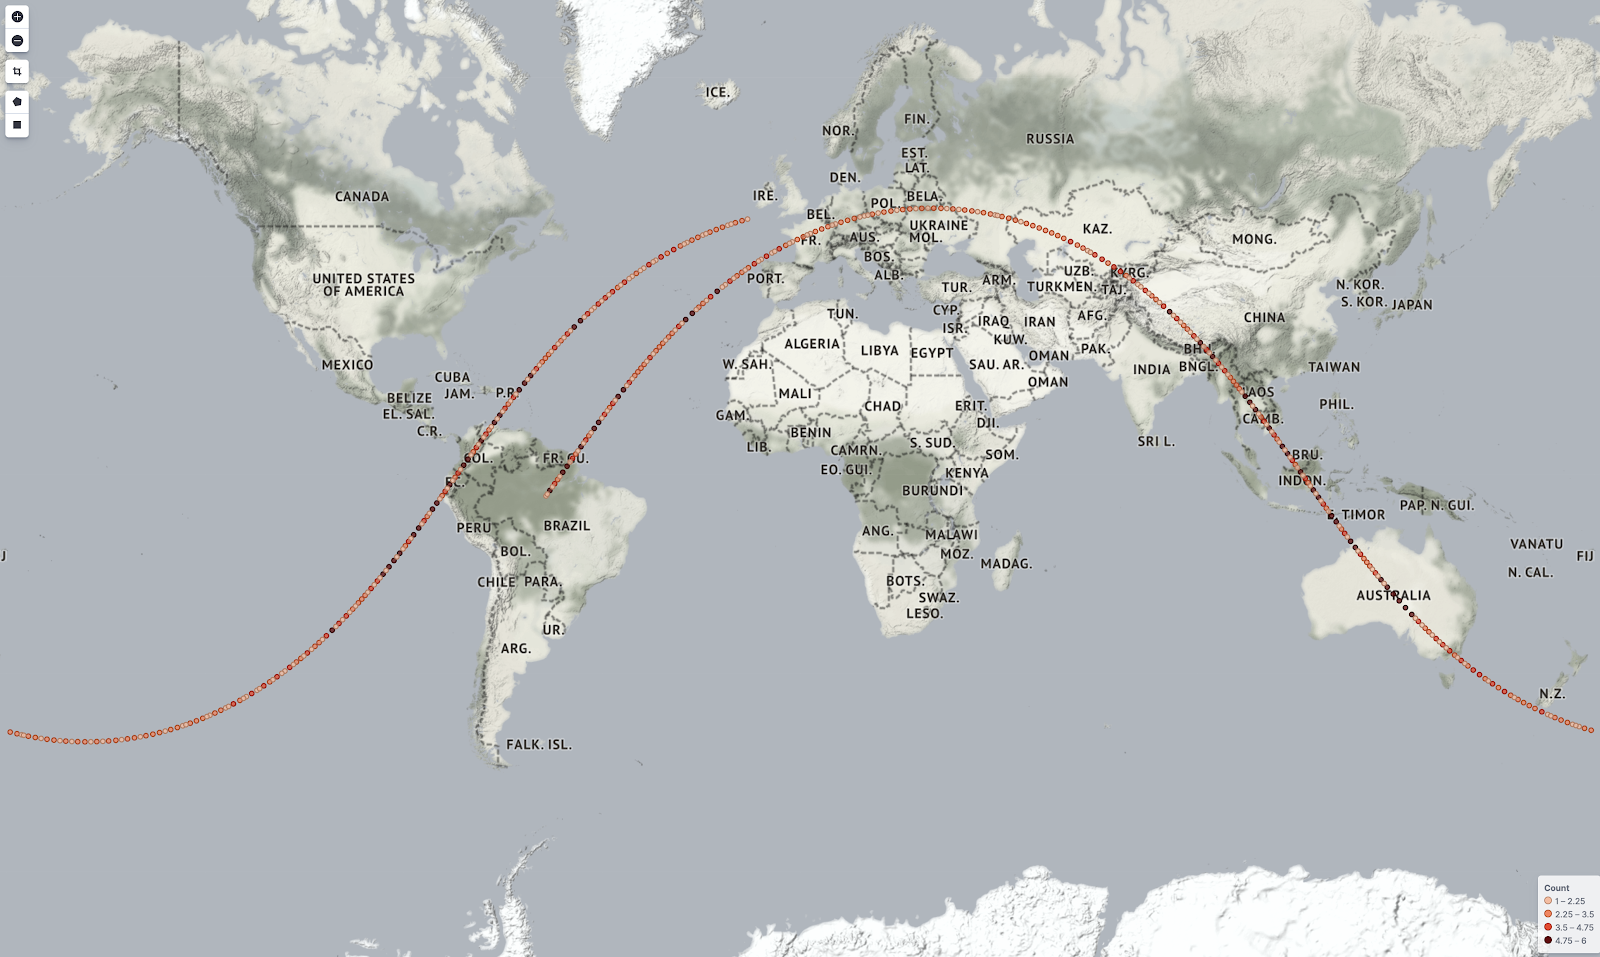 The path of the International Space Station - captured in real time using Filebeats and the Elasticsearch pipeline.